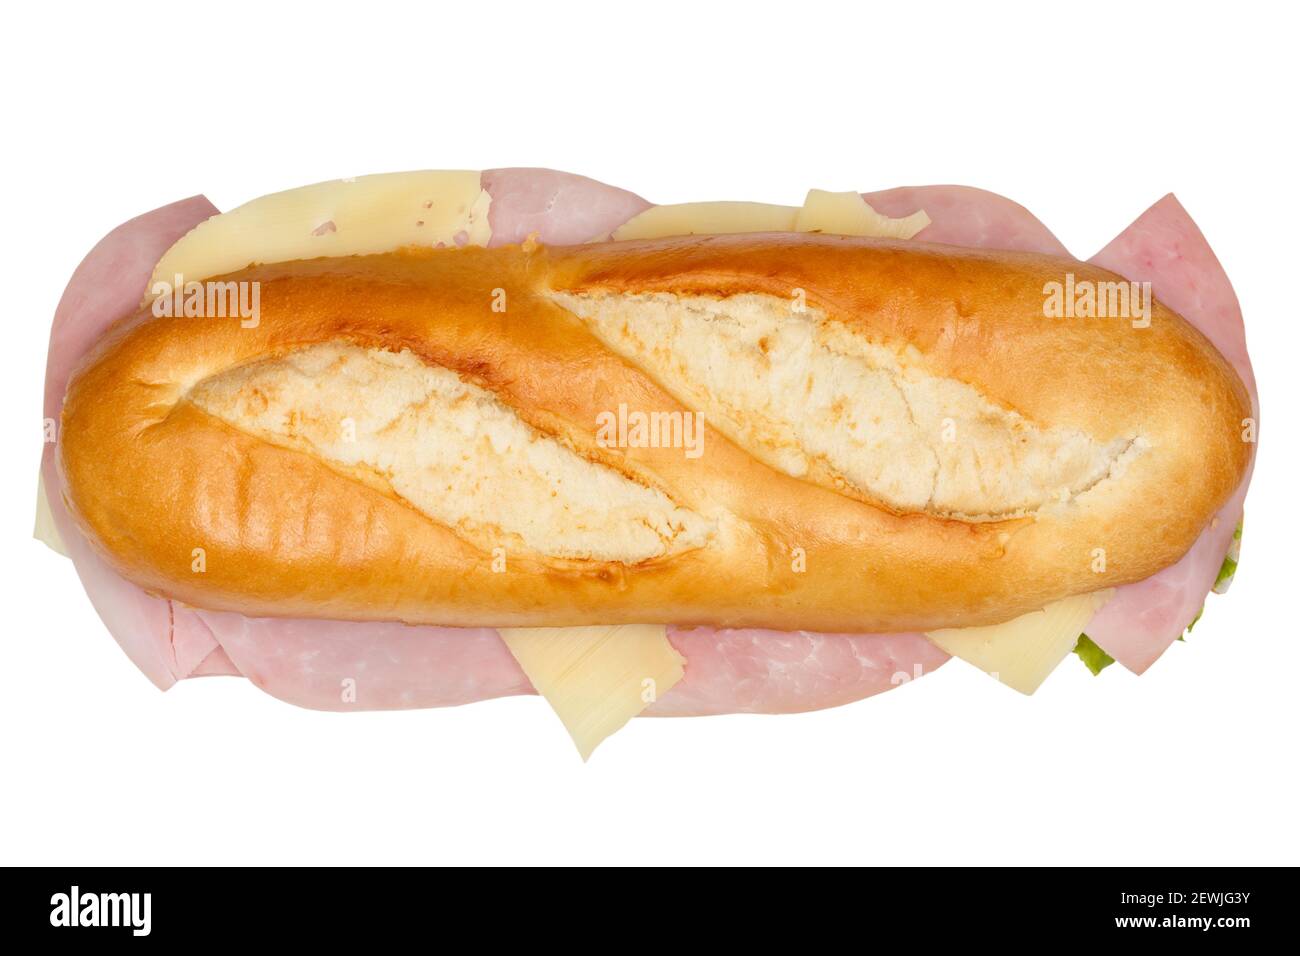 Baguette sub sandwich with ham and cheese from above isolated on a white background. Stock Photo